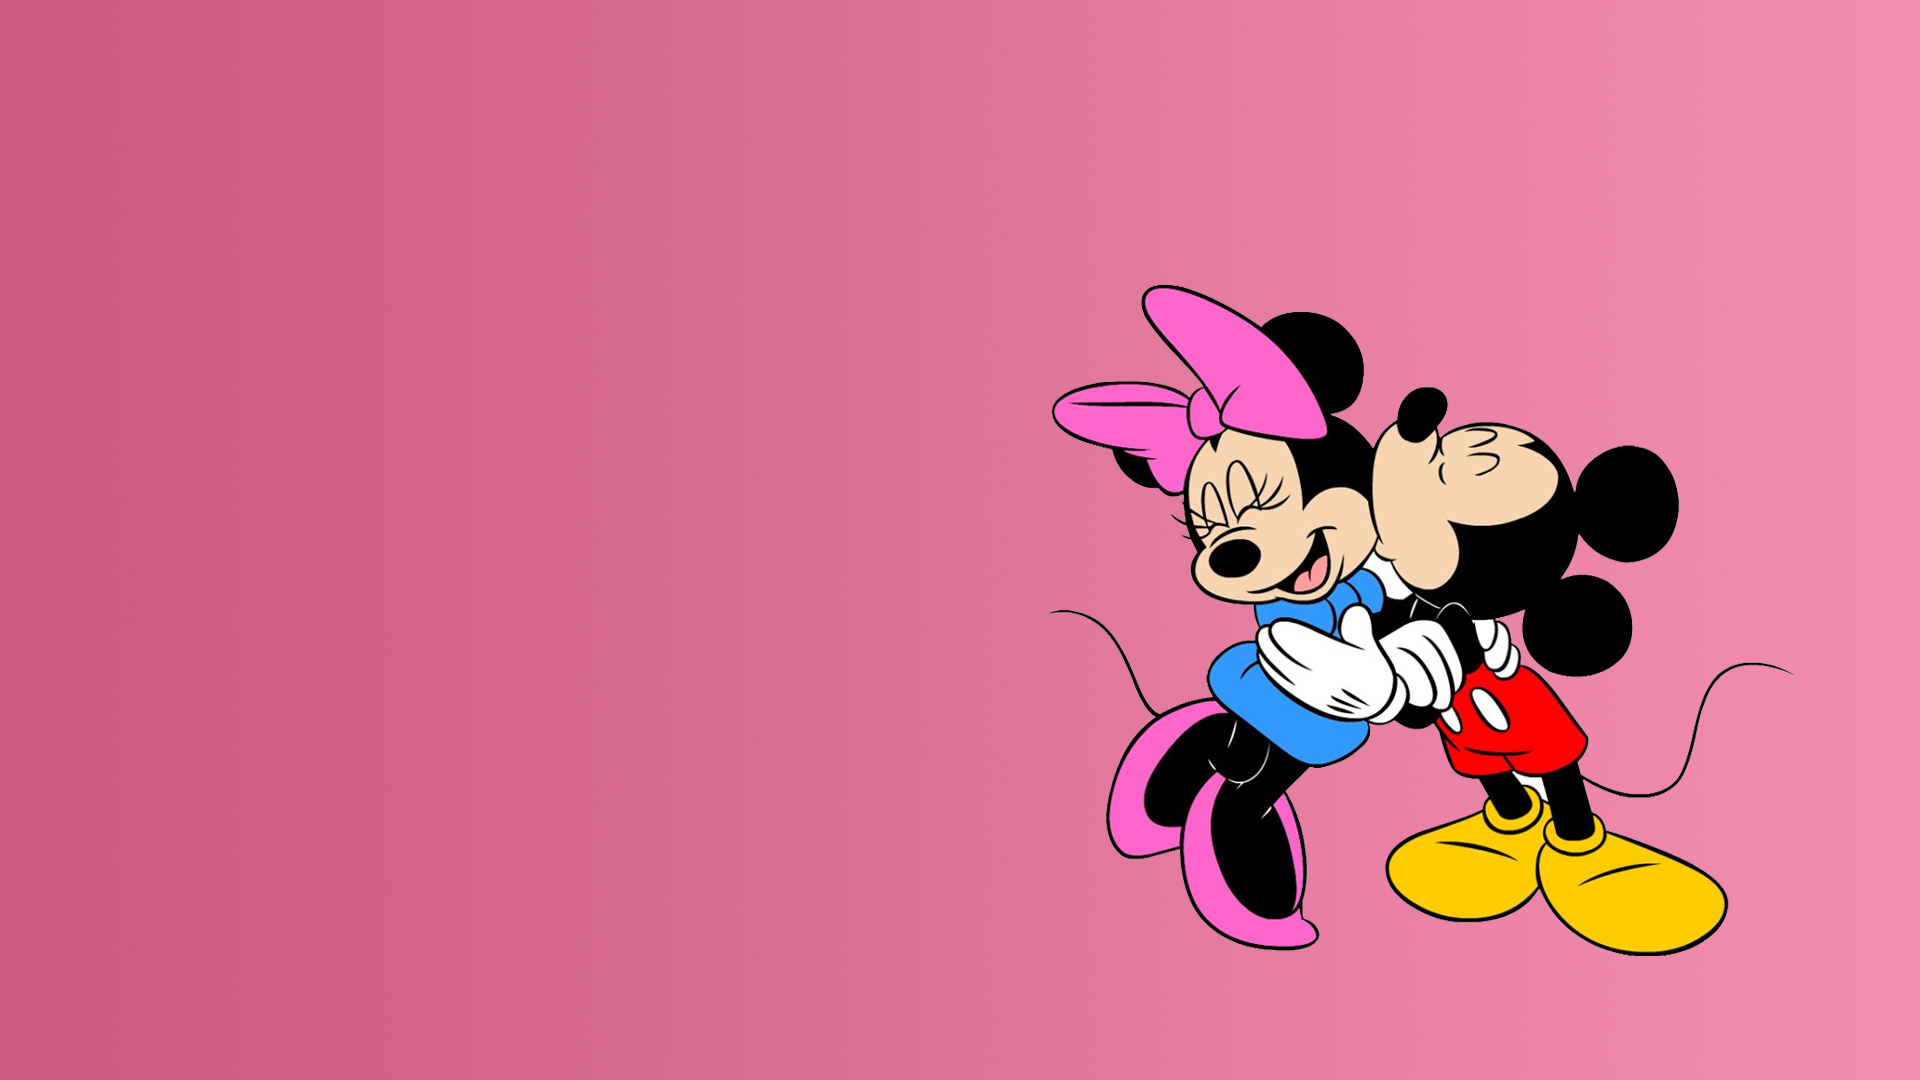 Minnie Mouse Wallpaper 07 - Mickey And Minnie Mouse Wallpaper Hd , HD Wallpaper & Backgrounds